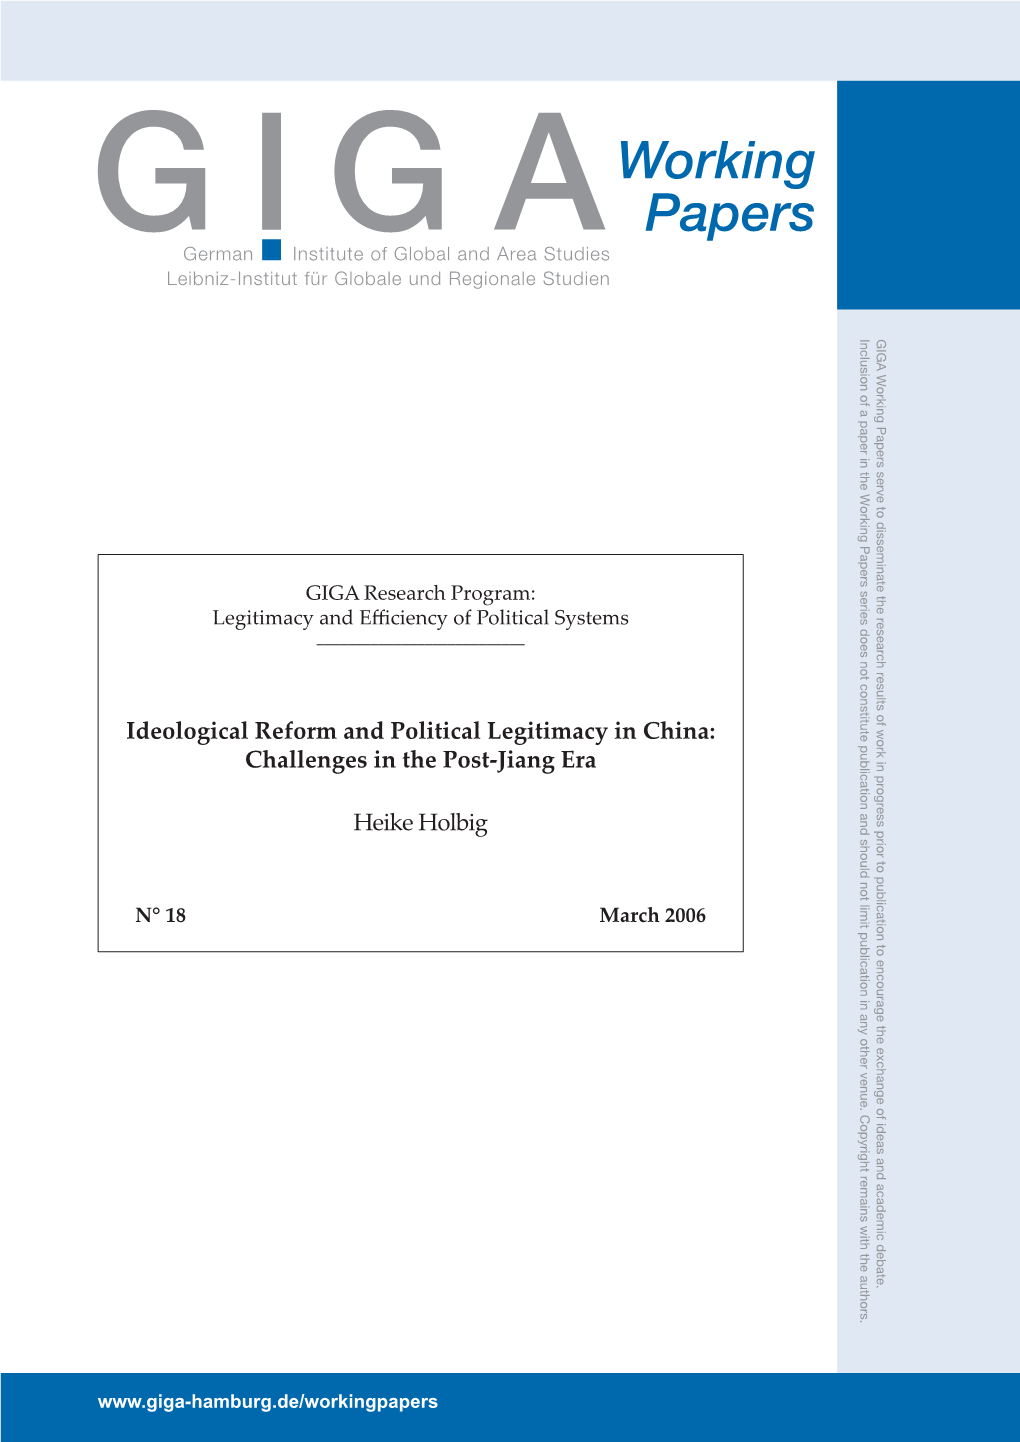 Ideological Reform and Political Legitimacy in China: Challenges in the Post-Jiang Era